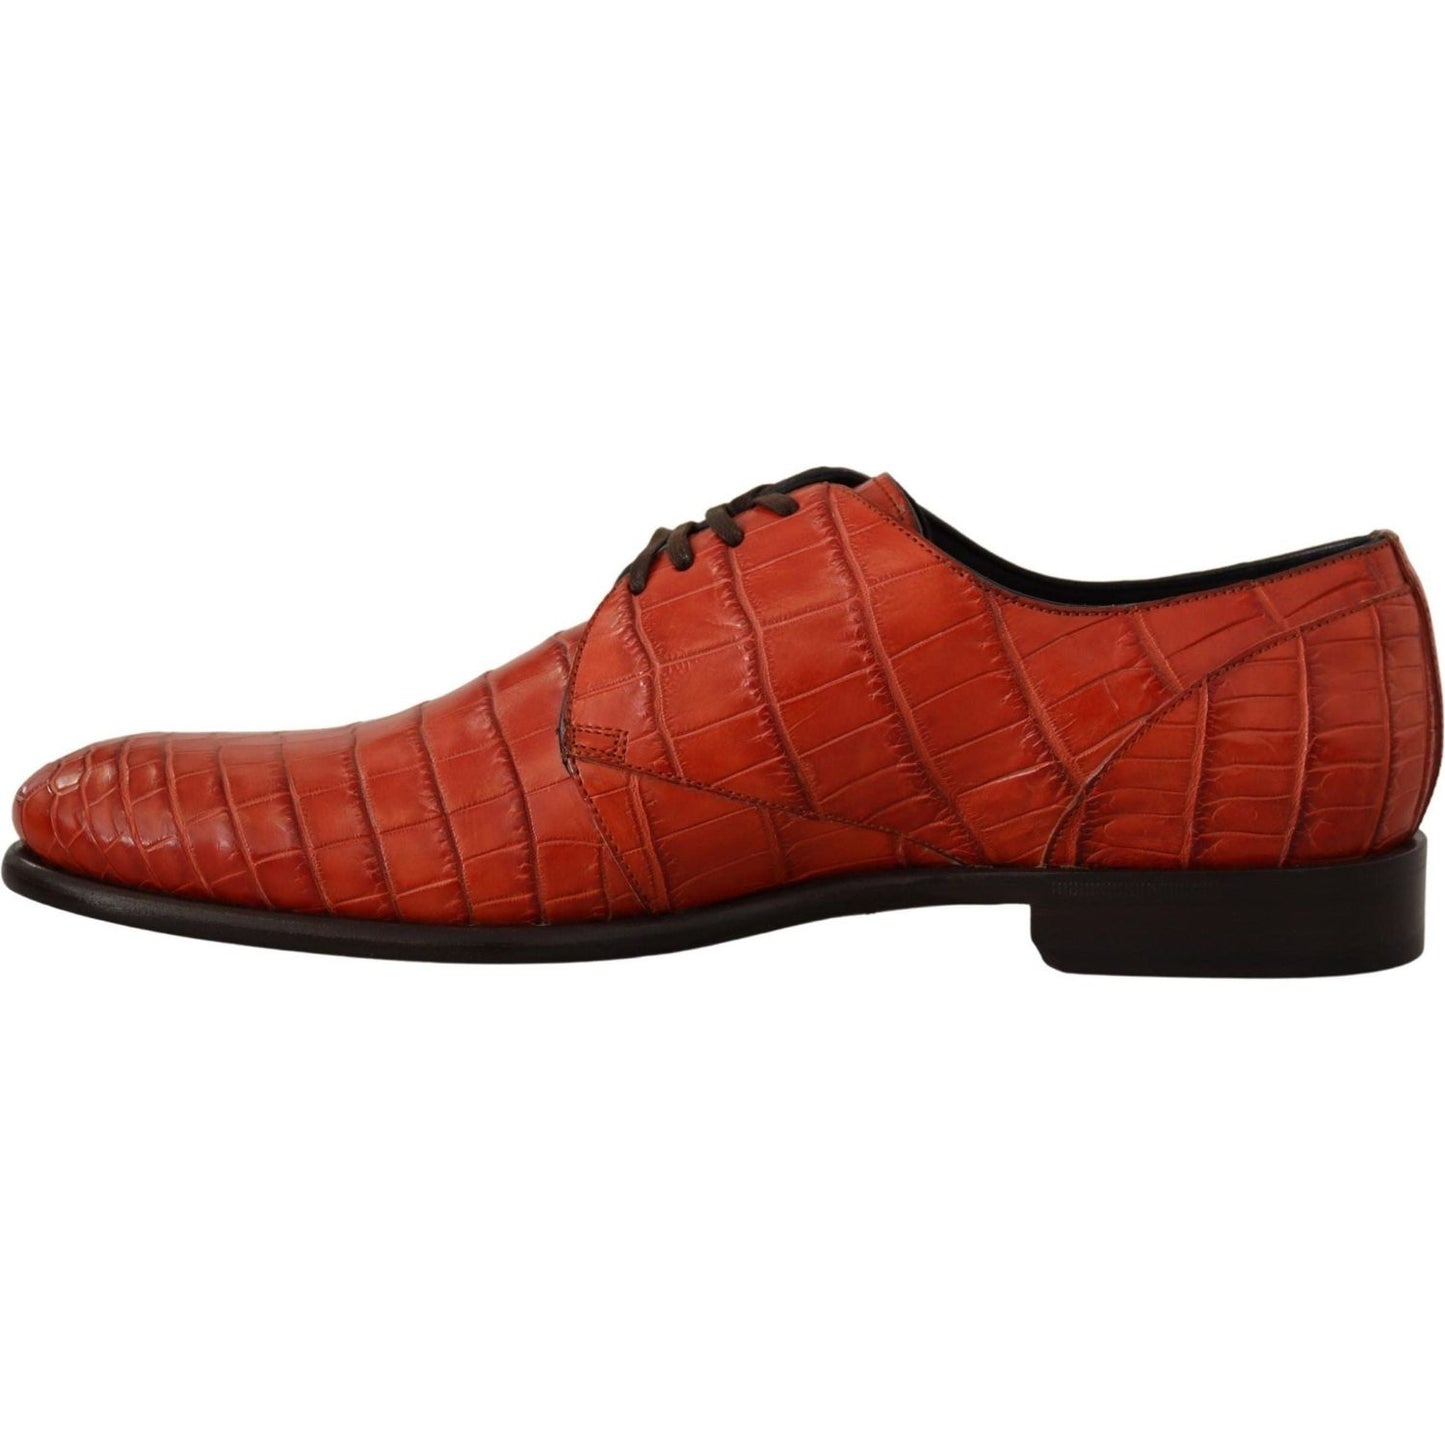 Dolce & Gabbana Exquisite Exotic Croc Leather Lace-Up Dress Shoes orange-exotic-leather-dress-derby-shoes IMG_2147-scaled-edee9c59-e92.jpg